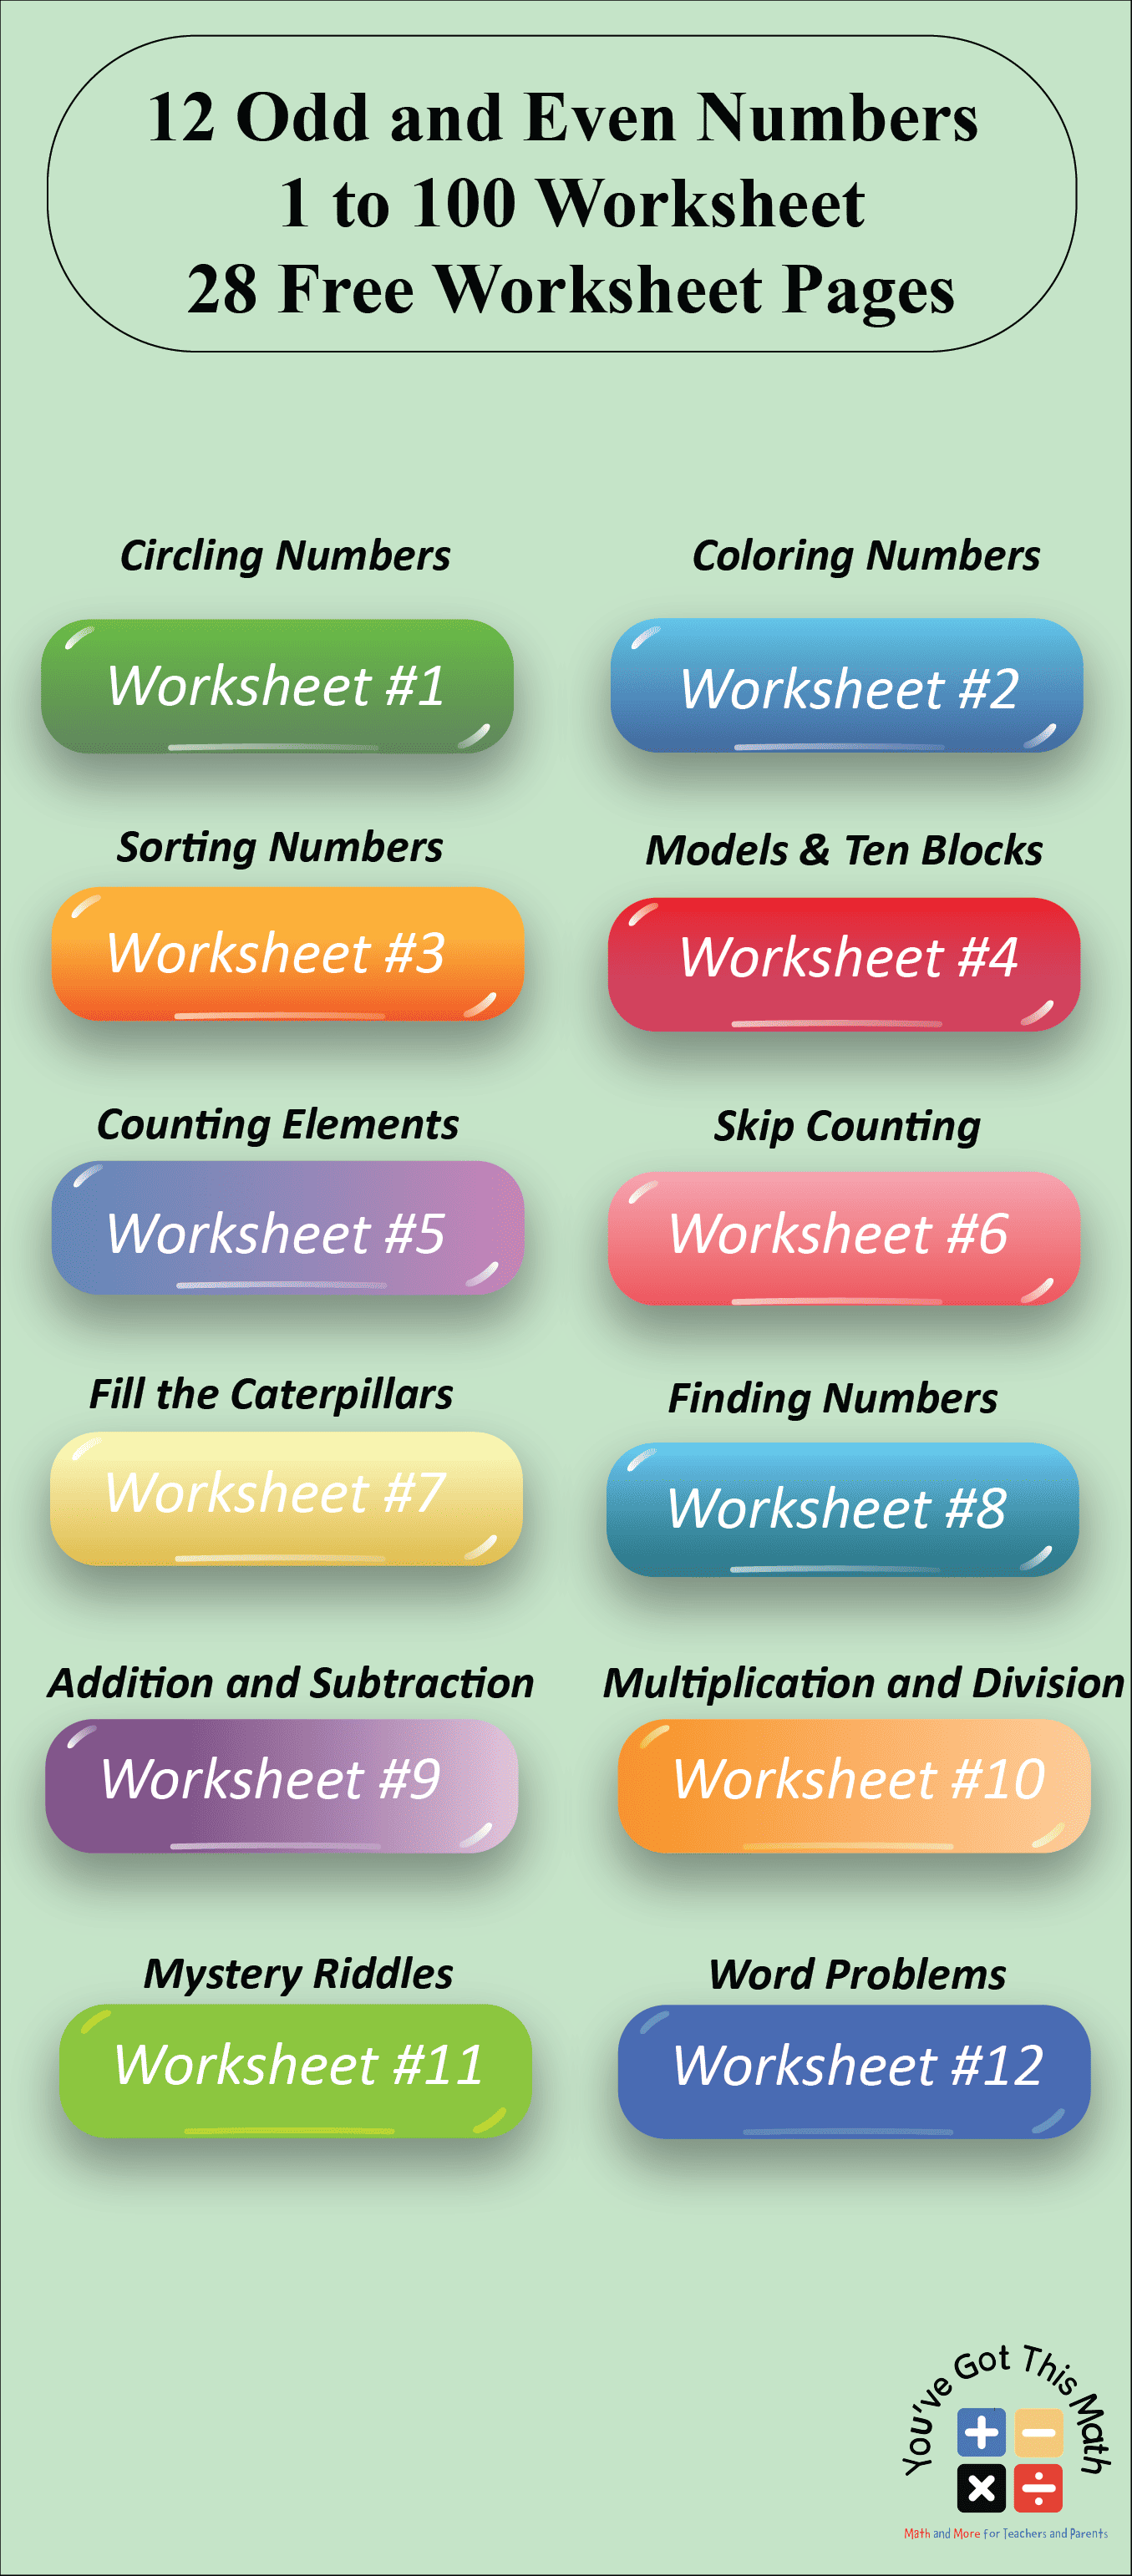 12-free-odd-and-even-numbers-1-to-100-worksheet